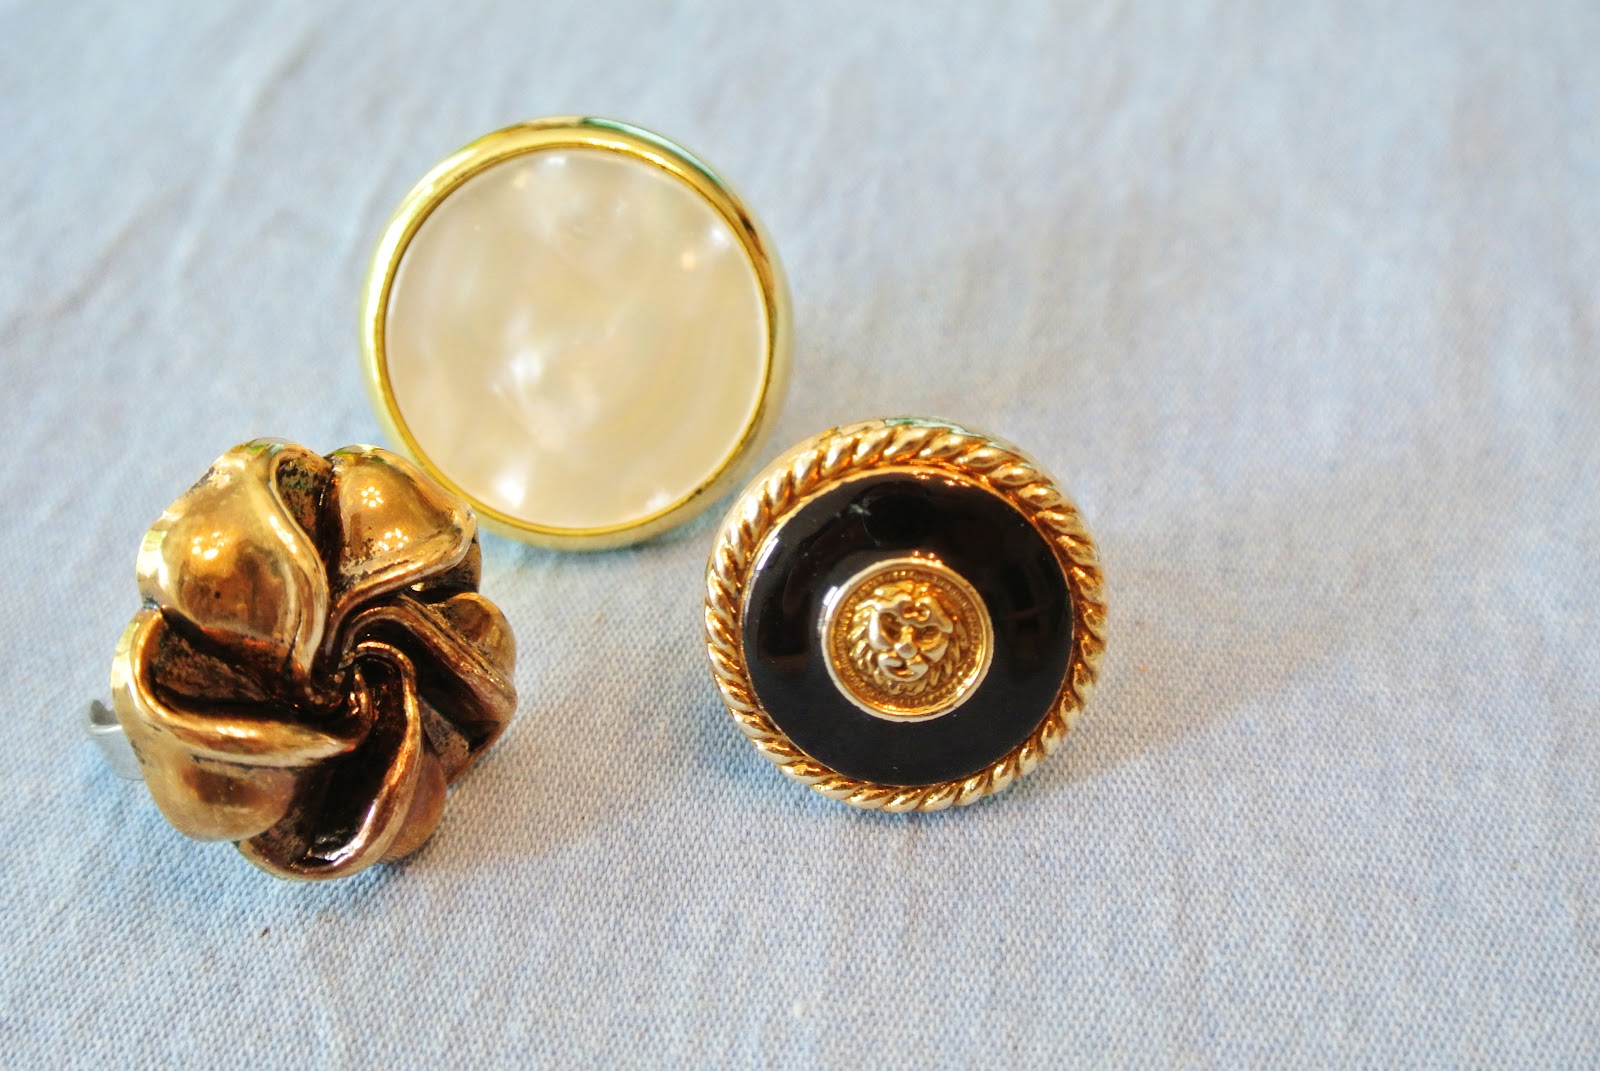 DIY: Vintage Button Jewelry | oh dear, angie!